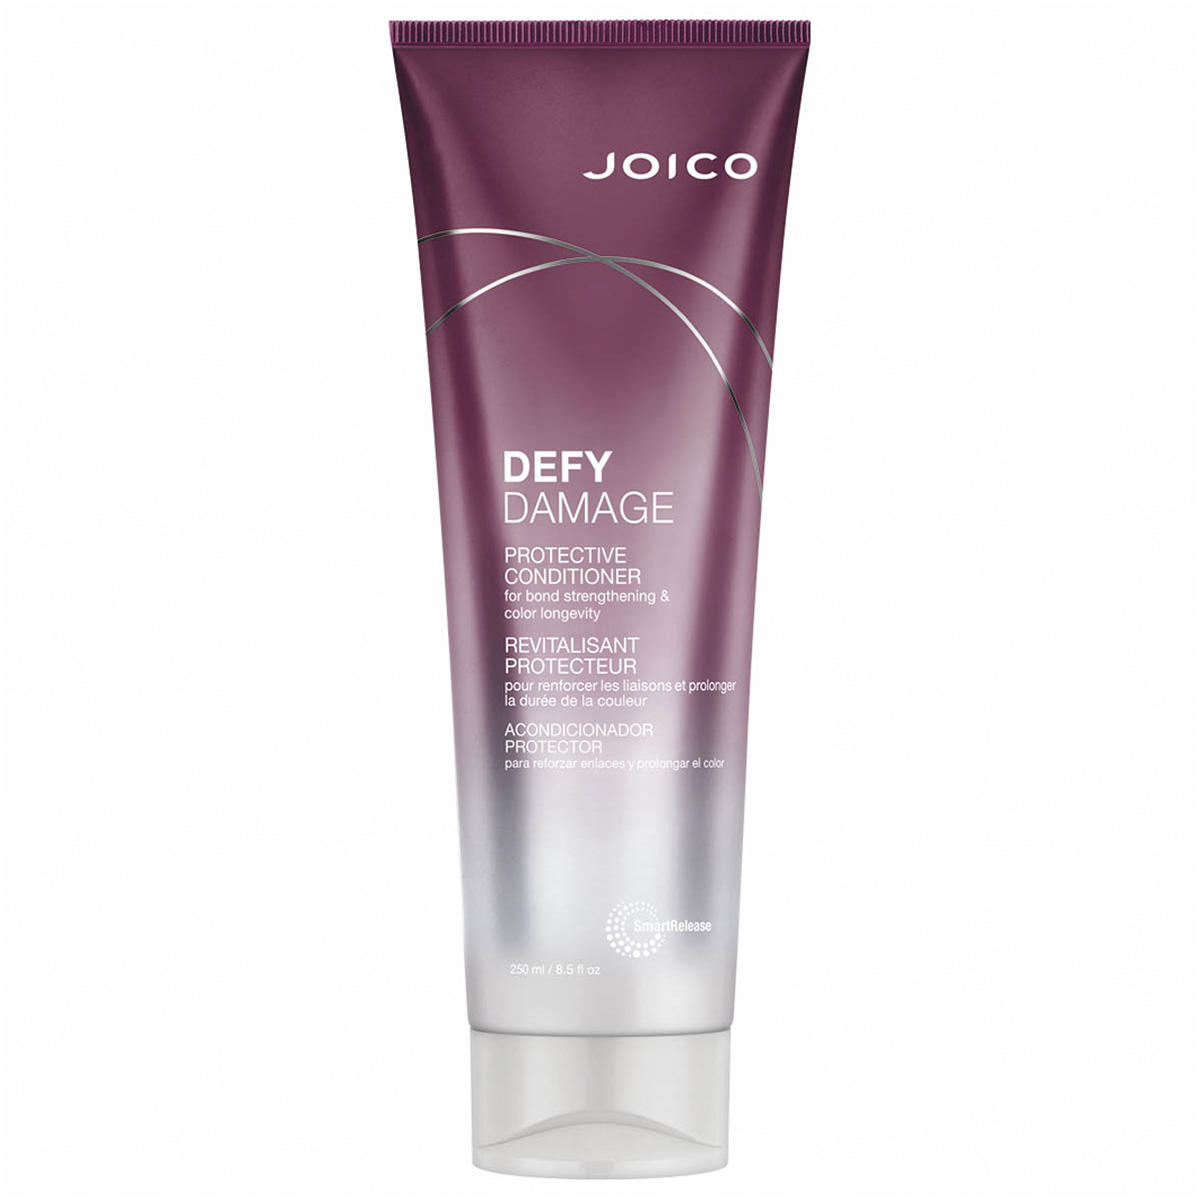 JOICO DEFY DAMAGE Protective Conditioner  - 1